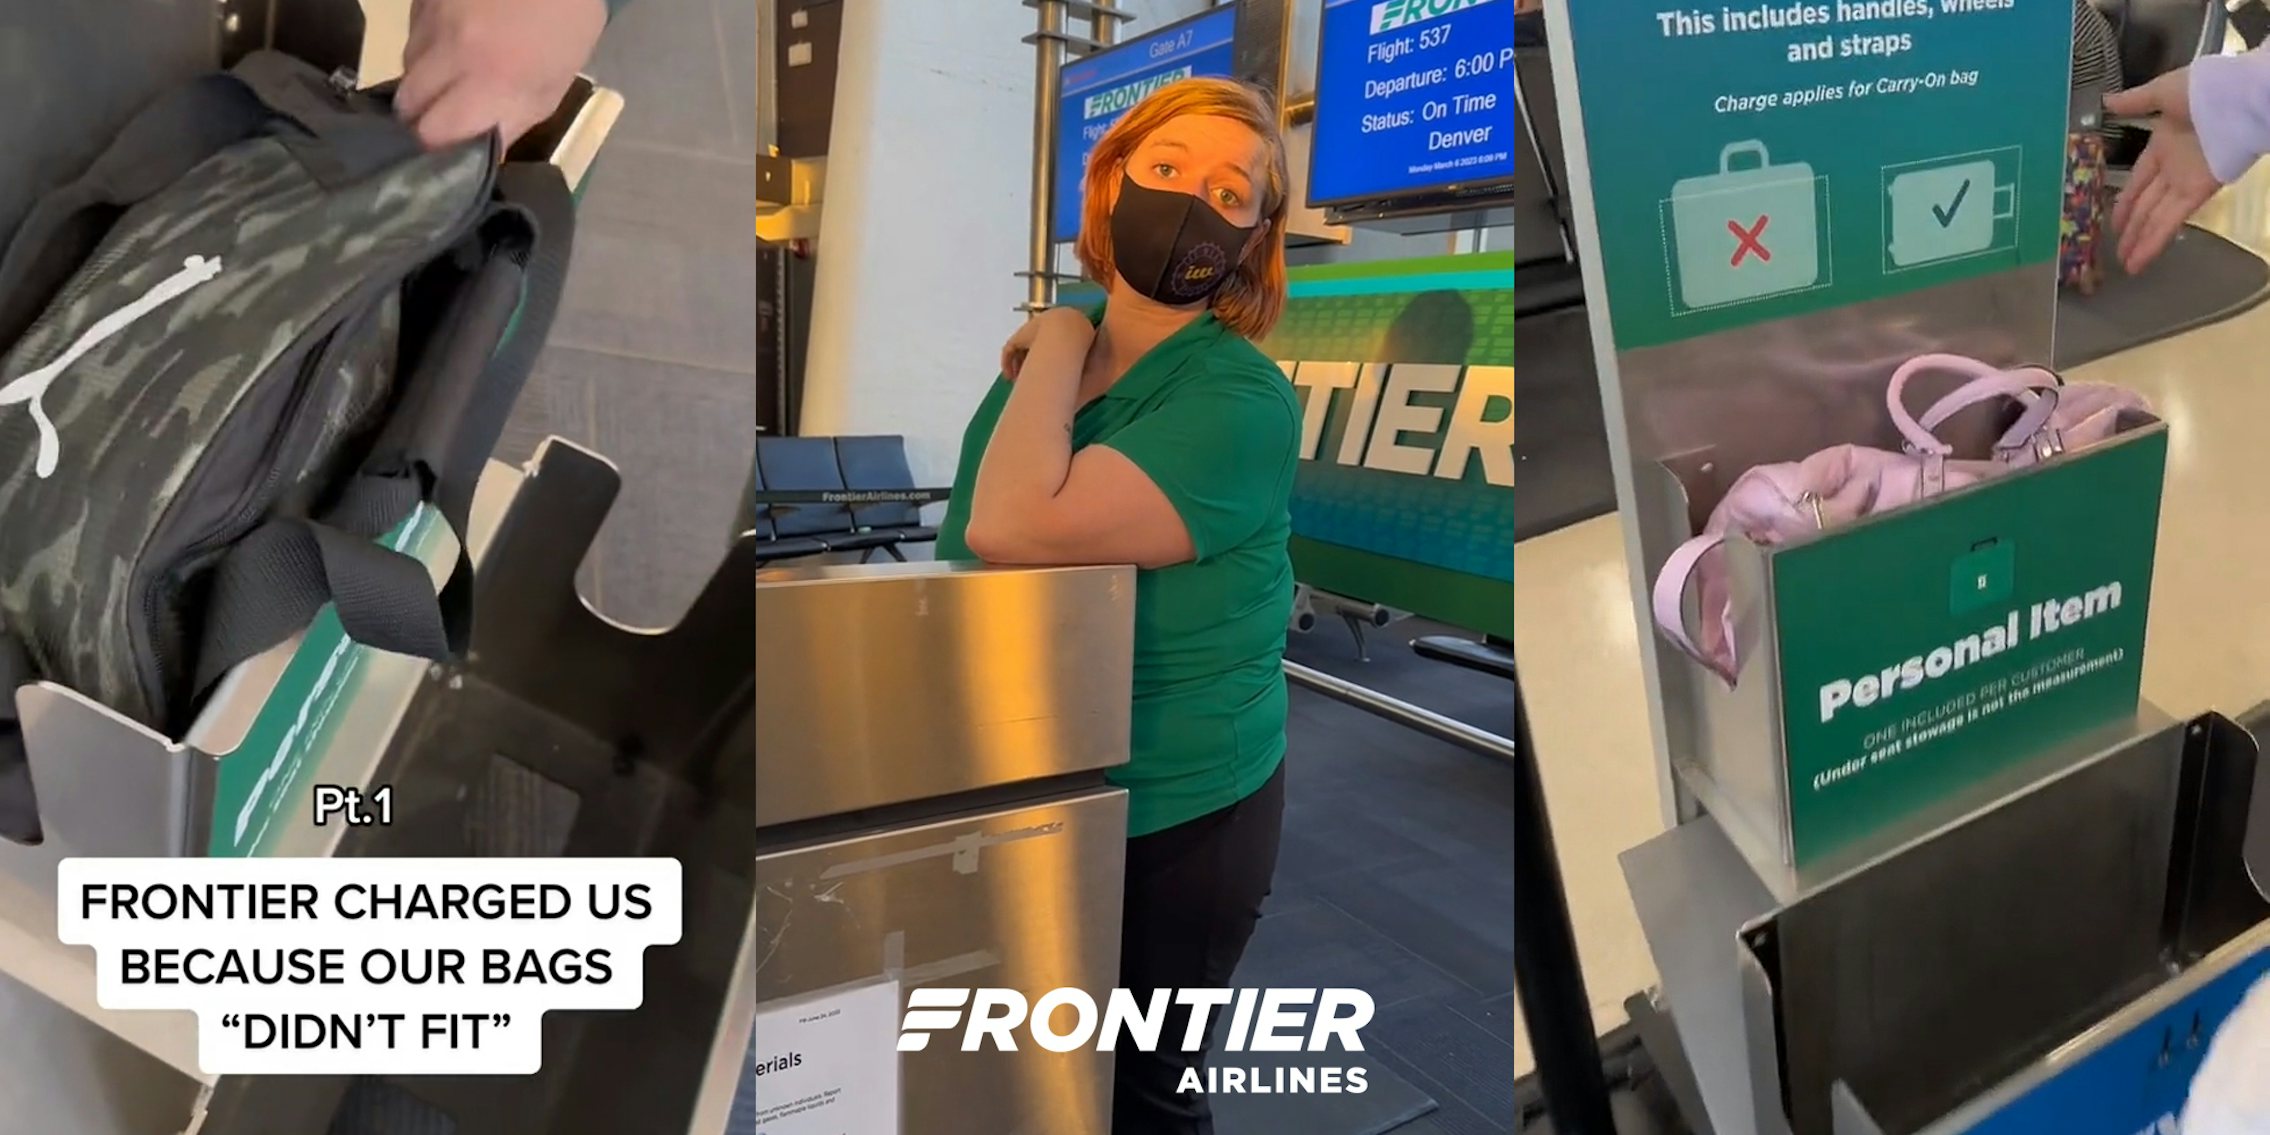 bag in Frontier carry-on charging area with caption 'Pt.1 FRONTIER CHARGED US BECAUSE OUR BAGS 'DIDN'T FIT' (l) Frontier Airlines employee speaking with Frontier Airlines logo at bottom (c) Frontier Airlines carry-on charging area with bag fitting (r)